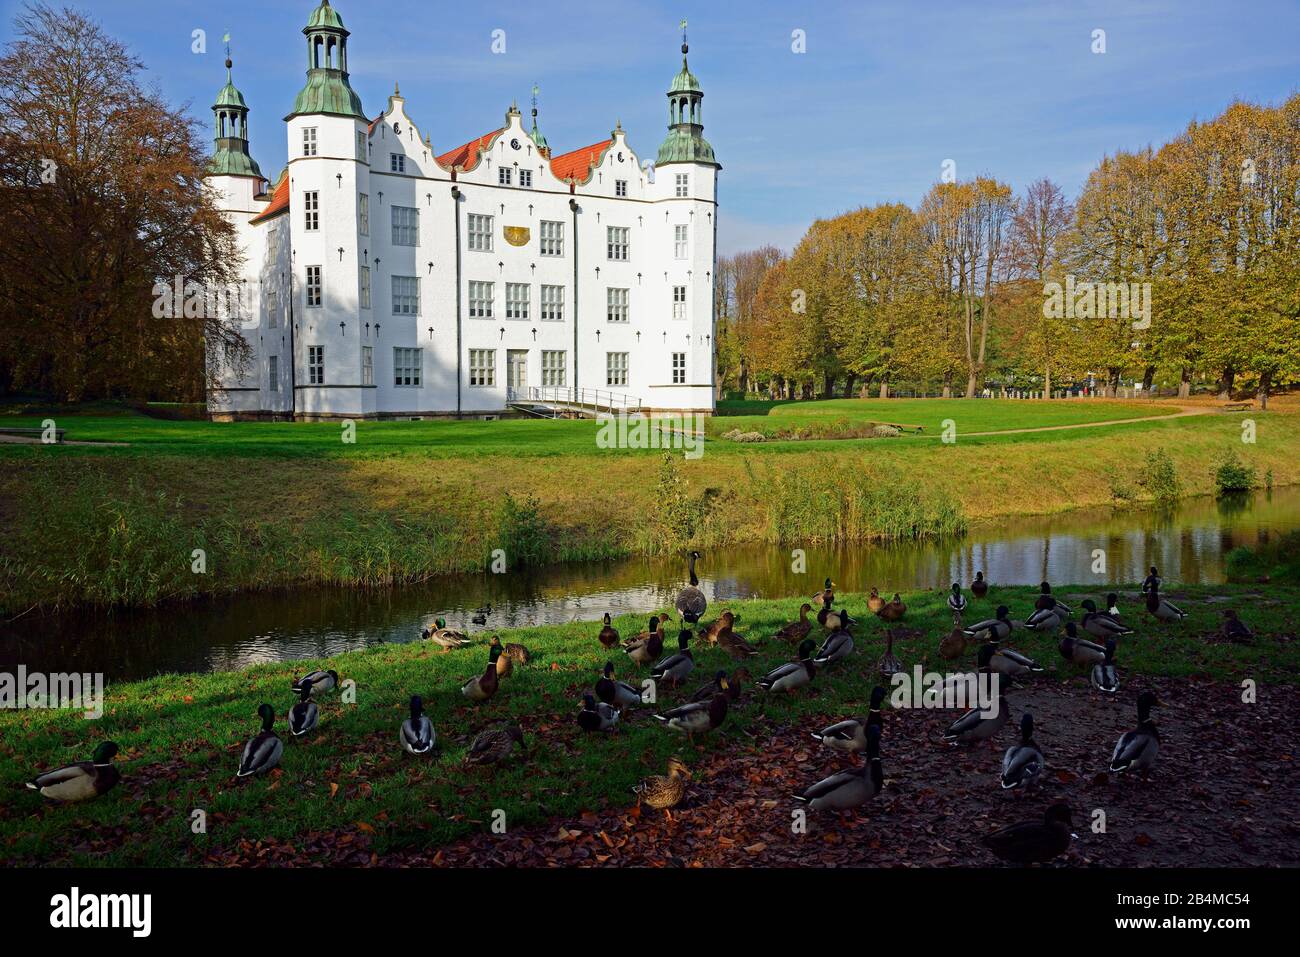 Europe, Germany, Schleswig-Holstein, Ahrensburg, Ahrensburg moated castle, autumn, front facade, built around 1595, late Renaissance, water birds in the foreground, Stock Photo